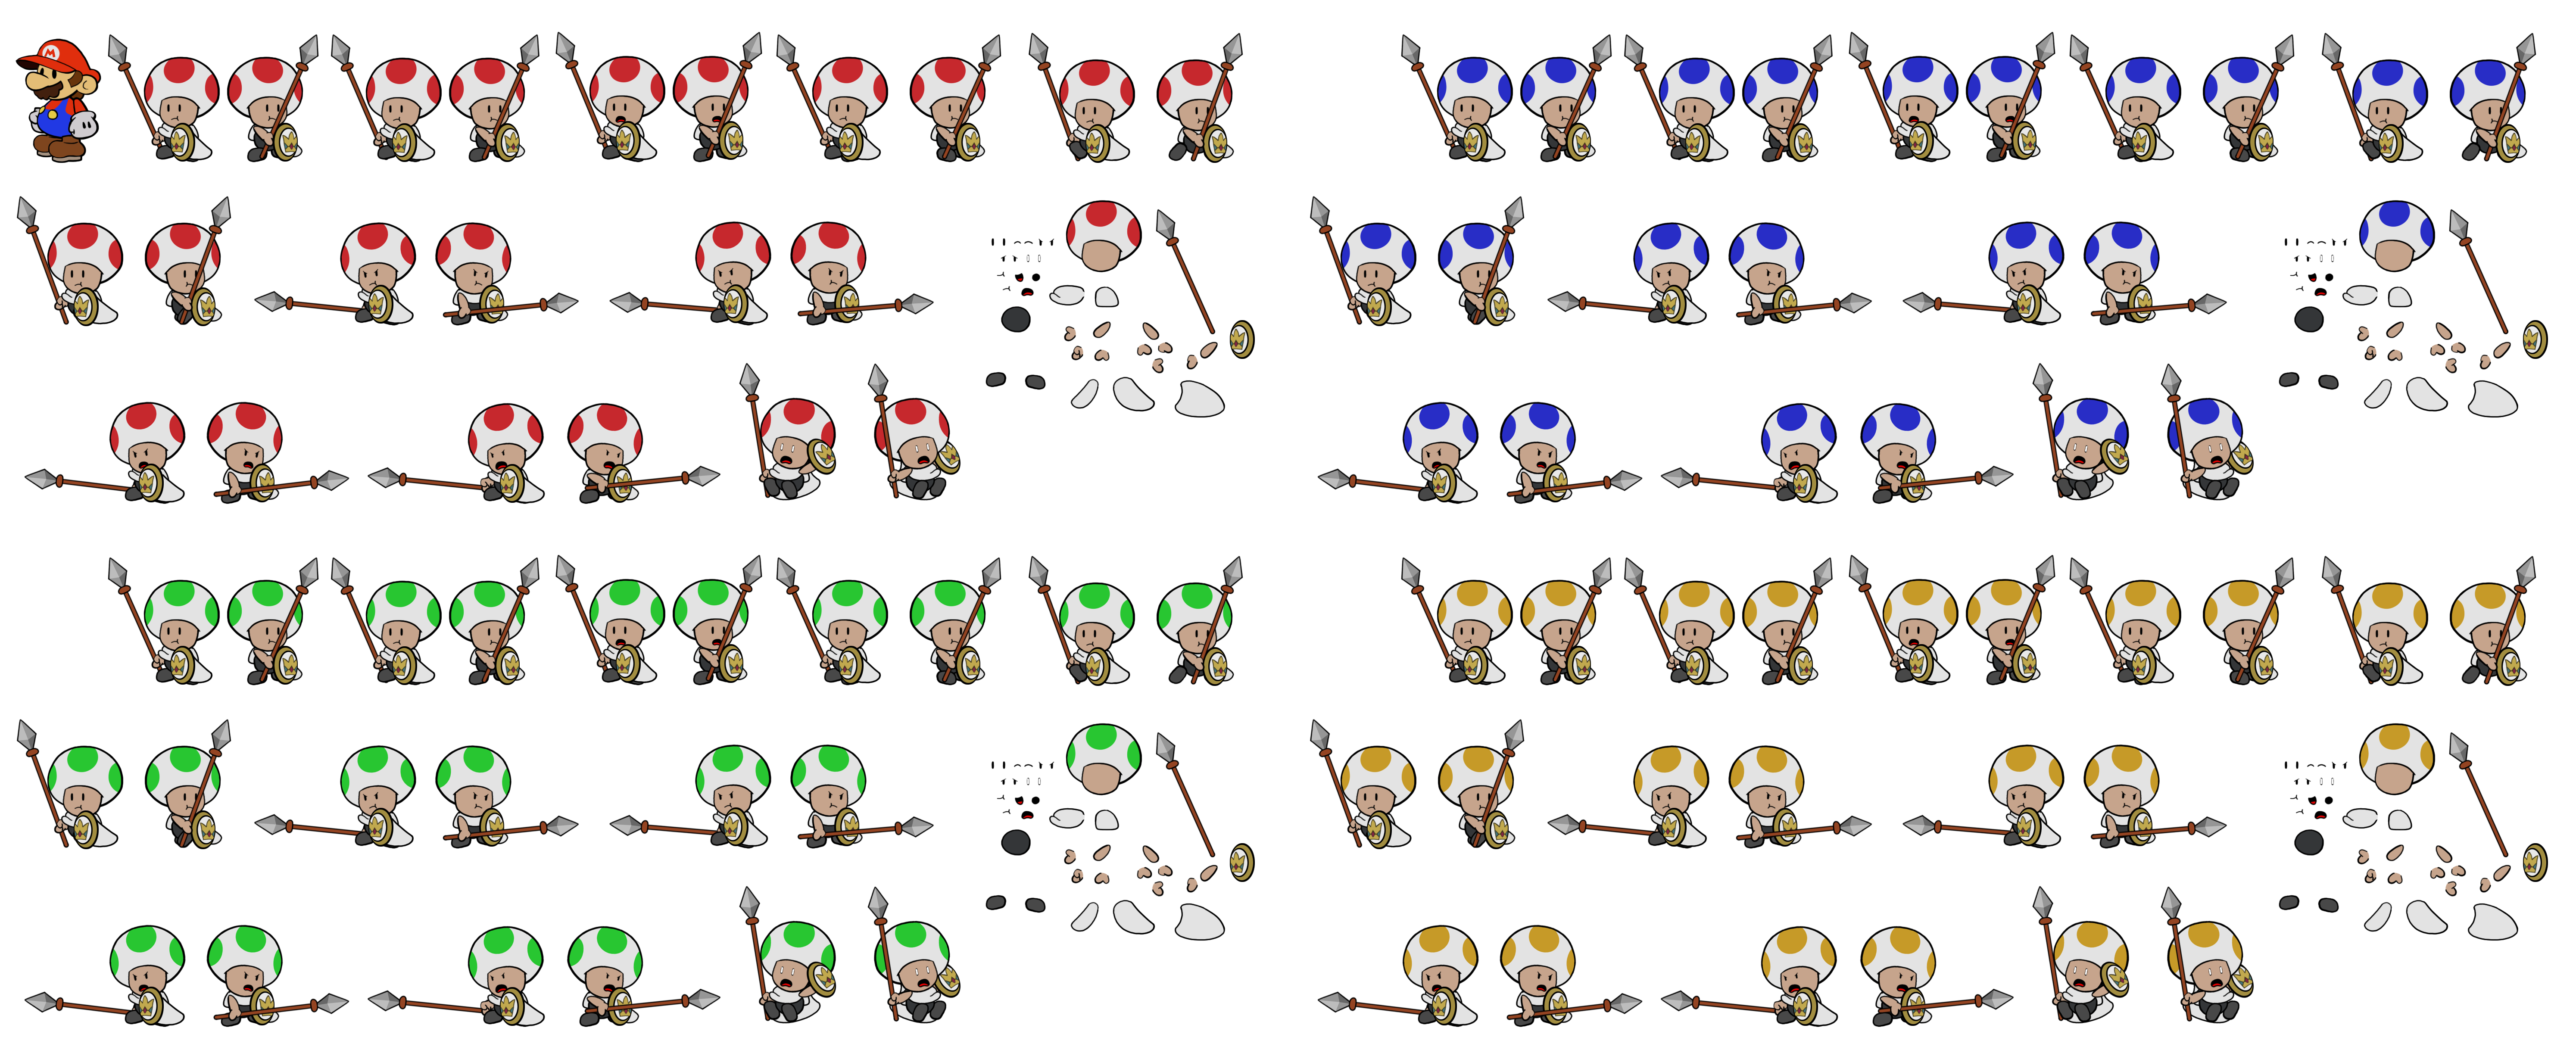 Guard Toads (Paper Mario-Style)